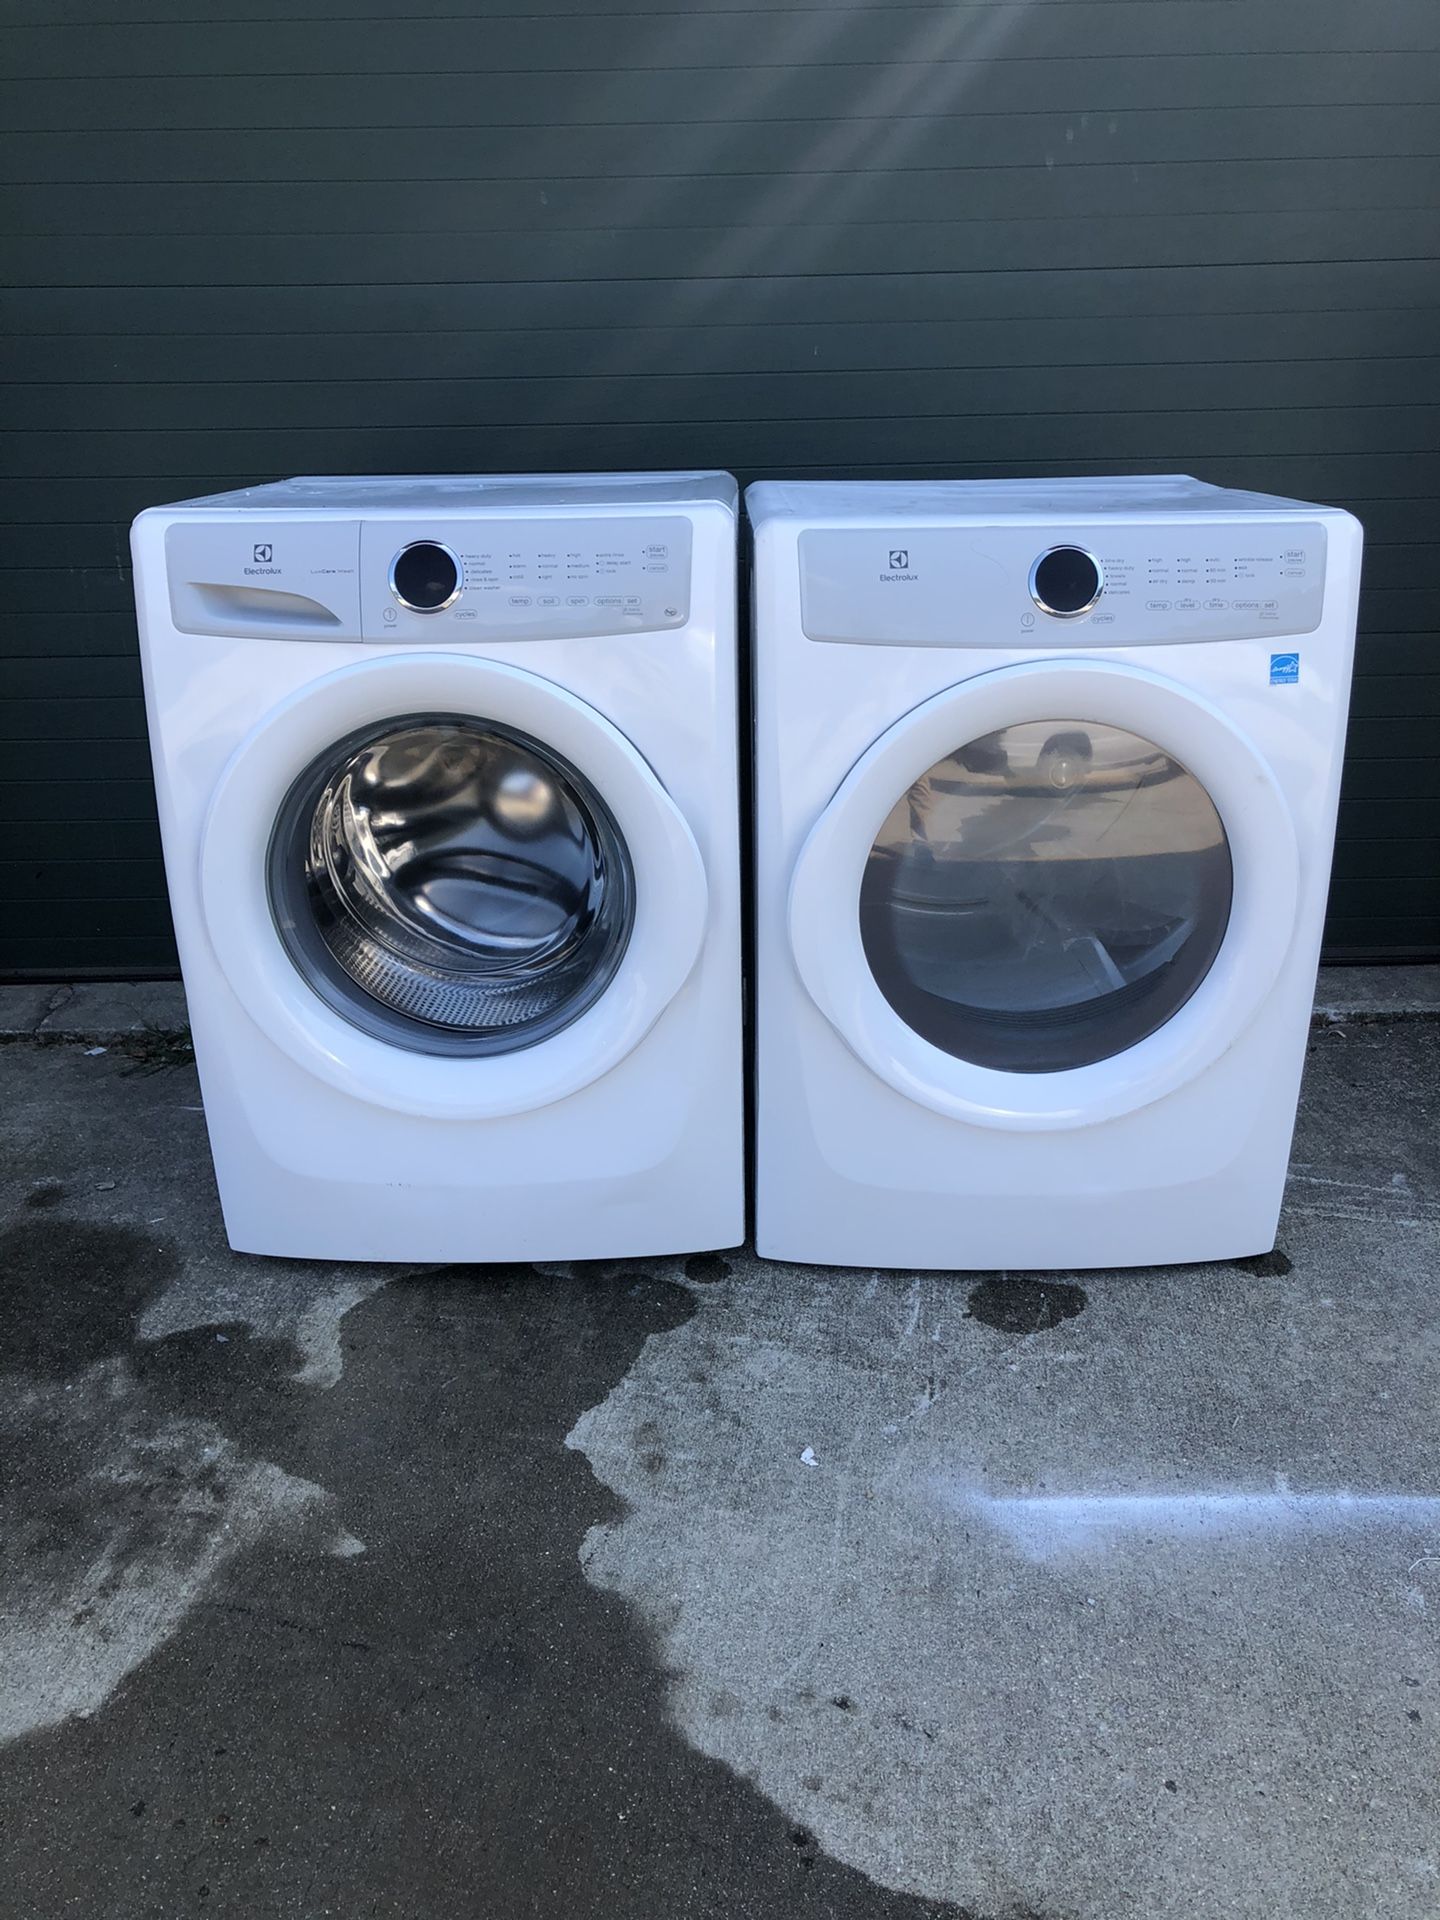 New scratch and dent Electrolux washer and dryer